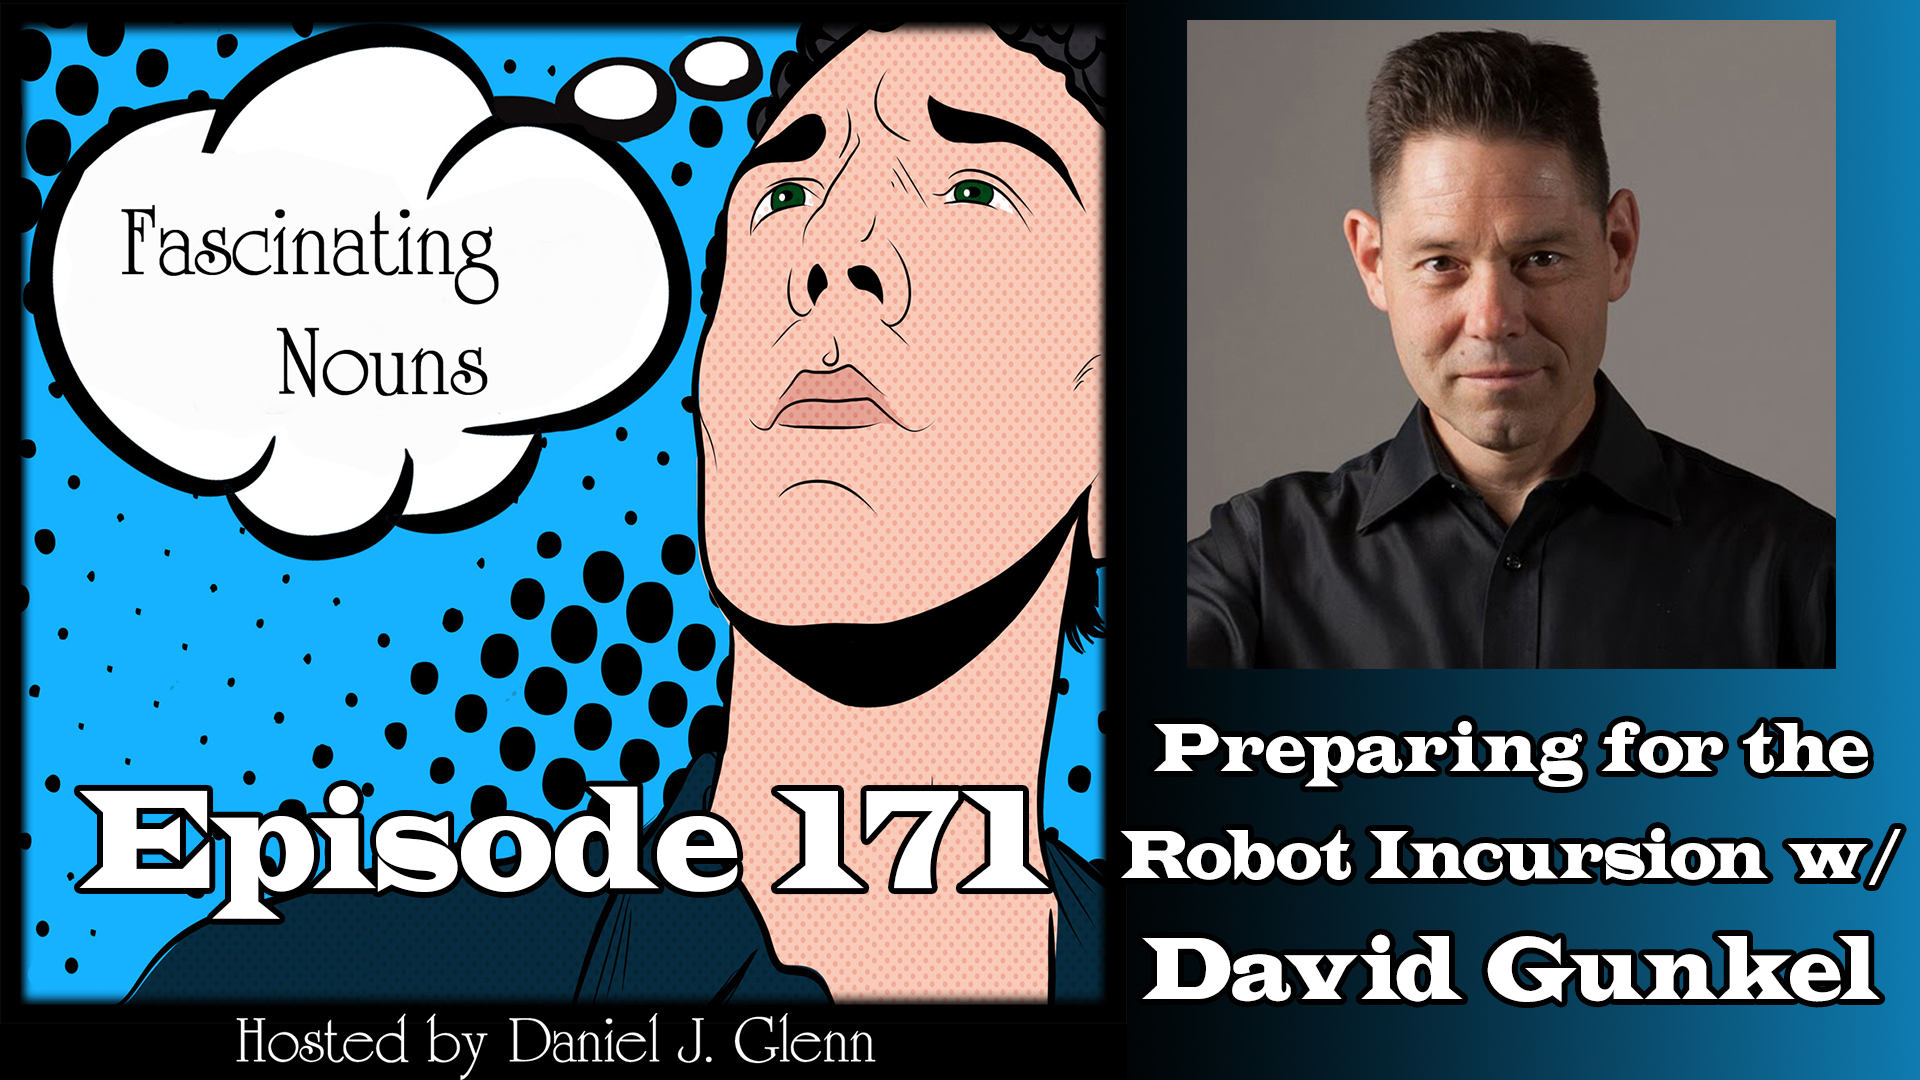 You are currently viewing Ep. 171:  Preparing for the Robot Incursion